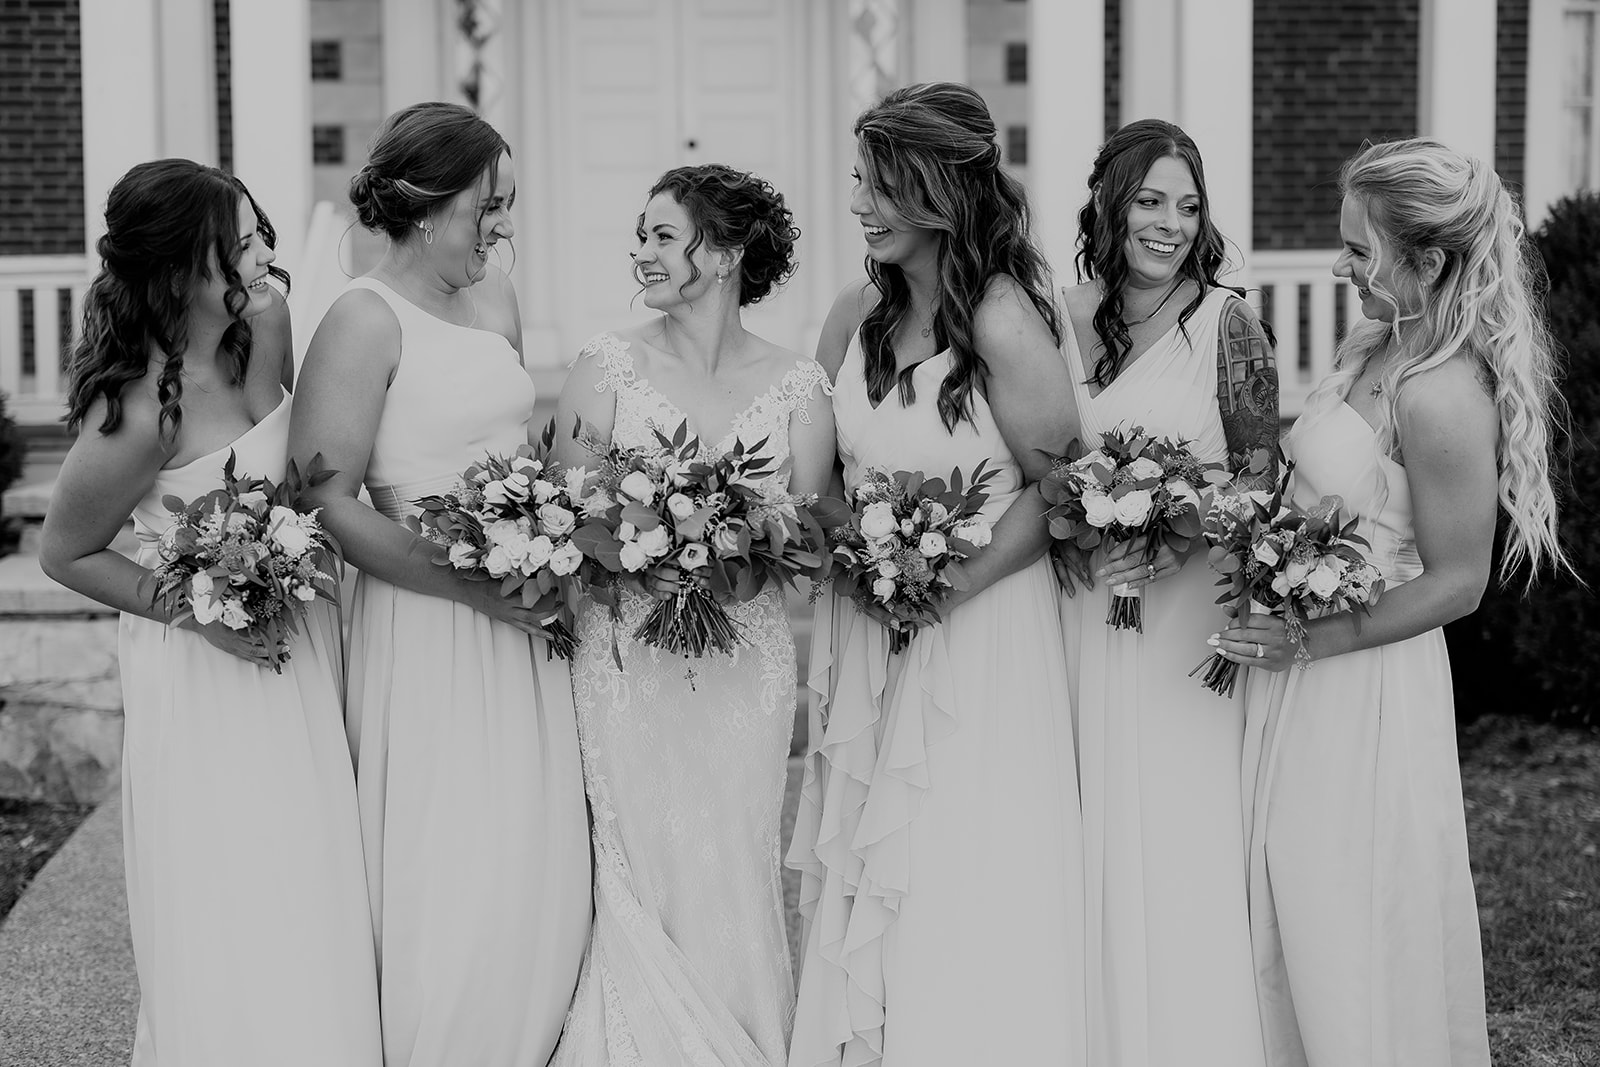 A bride stands with her bridesmaids outside a brick building holding their bouquets Ravenswood Mansion